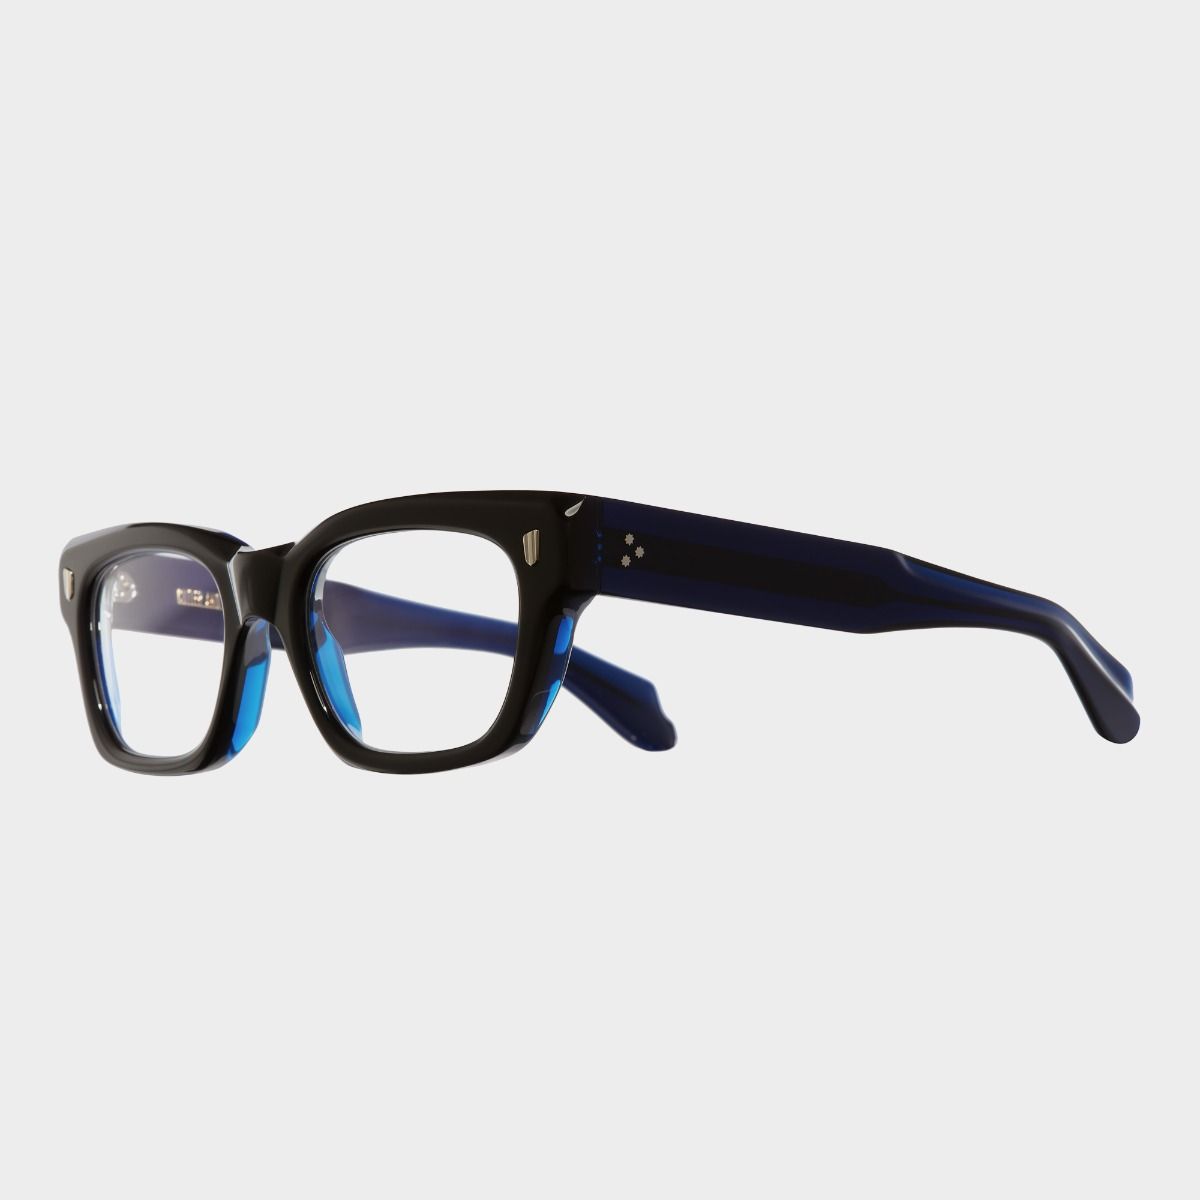 Cutler and Gross, 1391 Optical Rectangle Glasses - Black on Blue